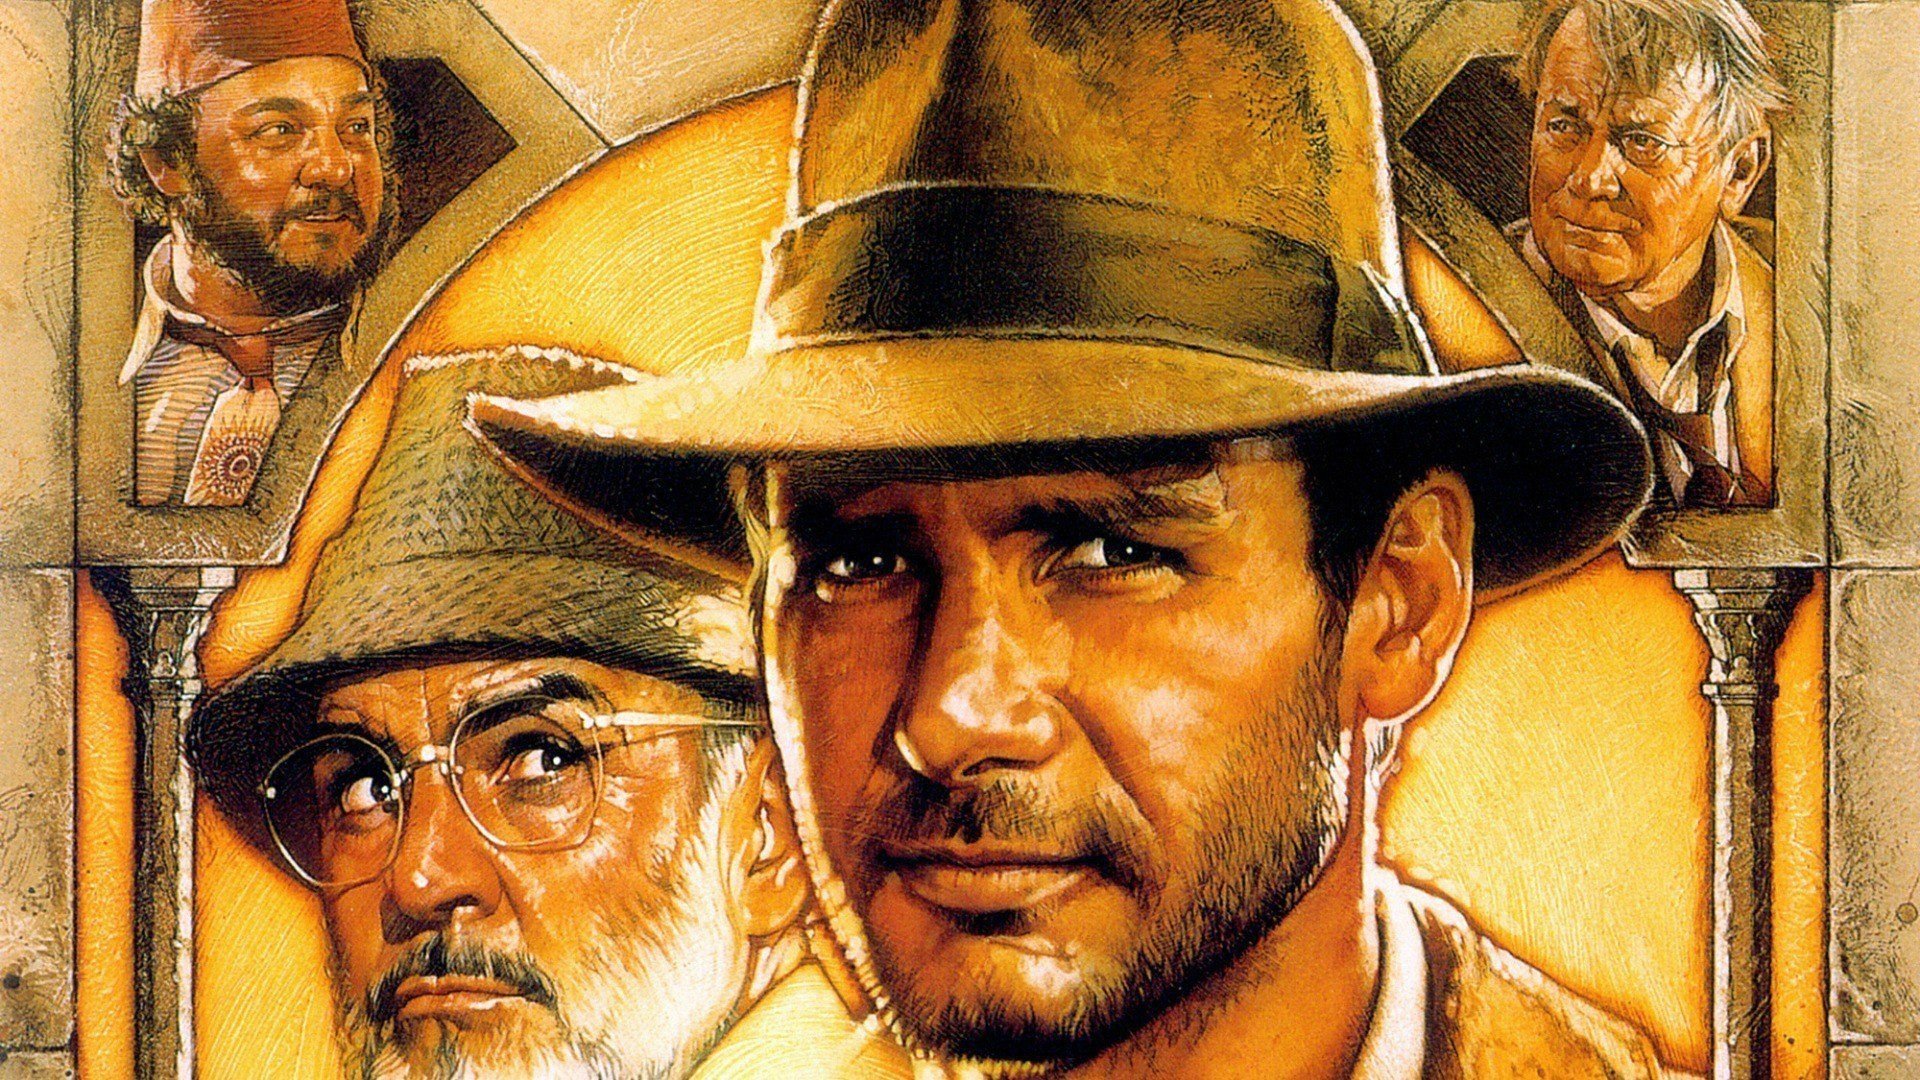 Indiana Jones and the Last Crusade HD Wallpaper Background Image